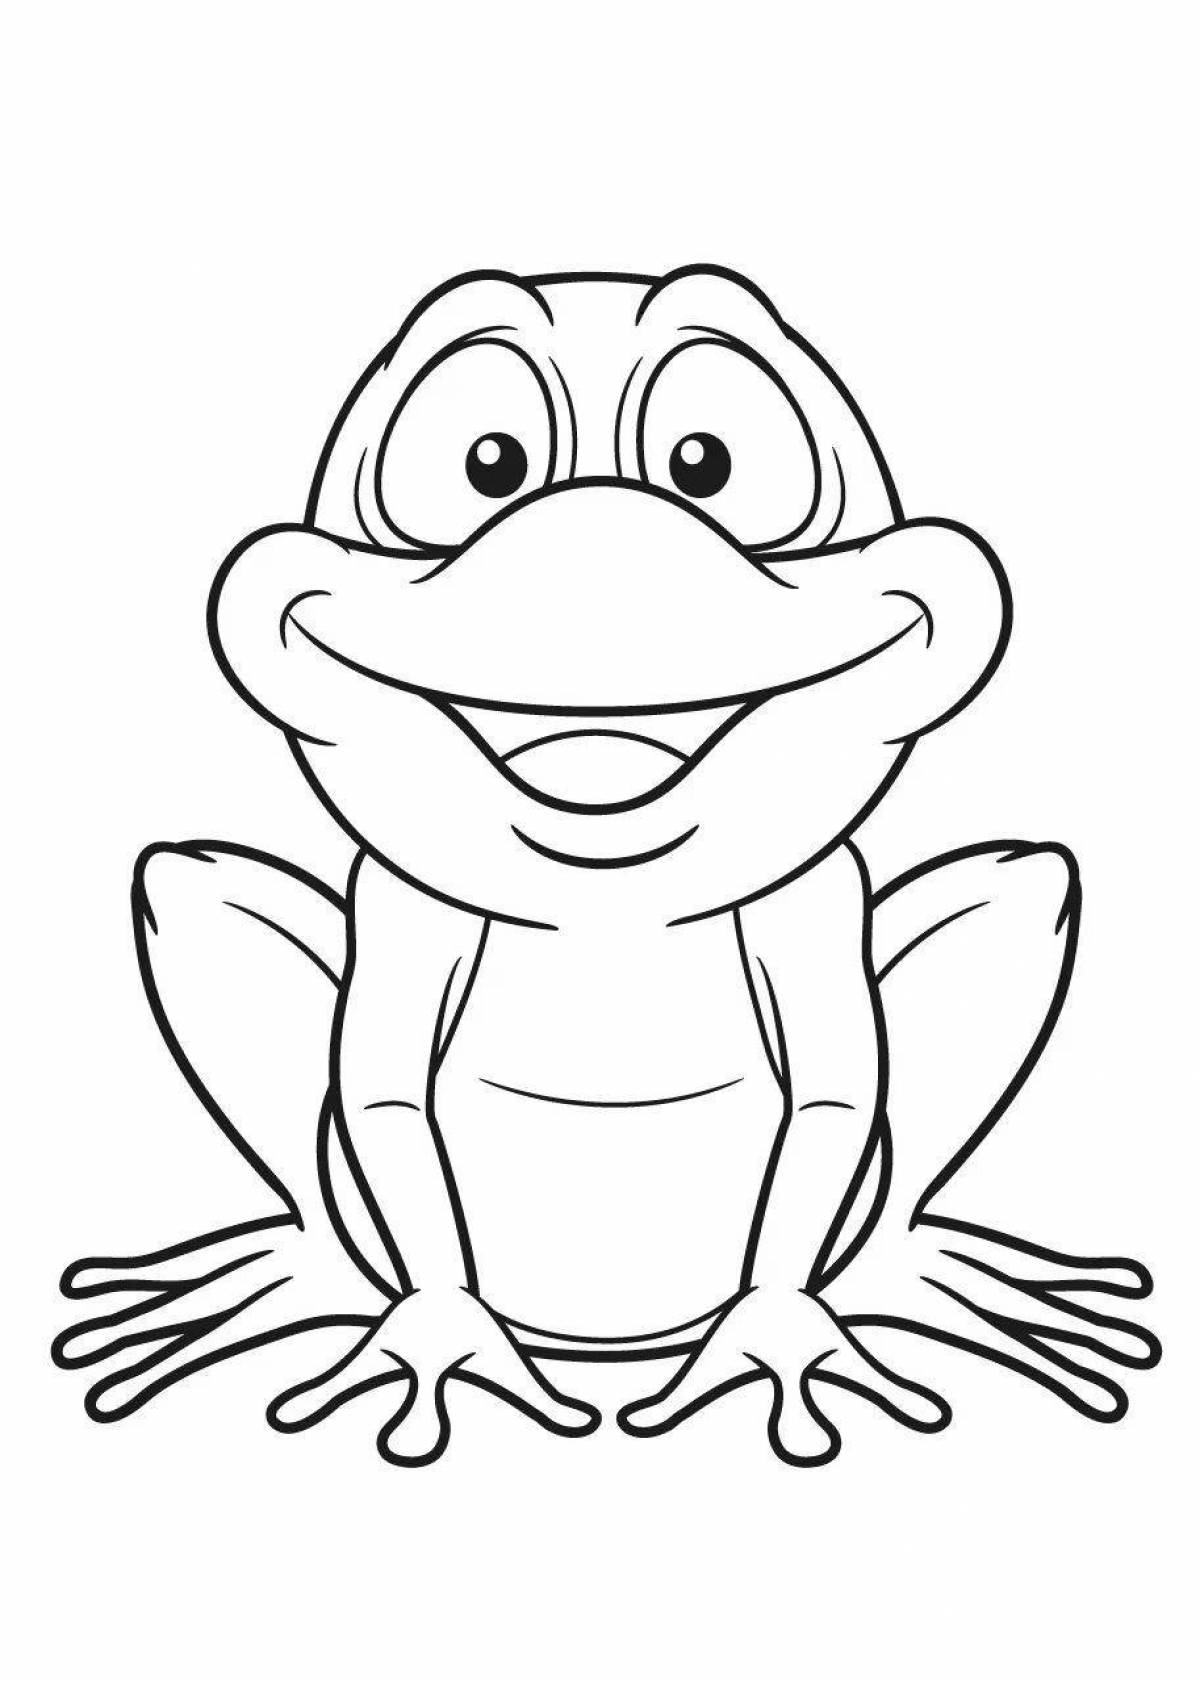 Colored frog-teremok coloring page